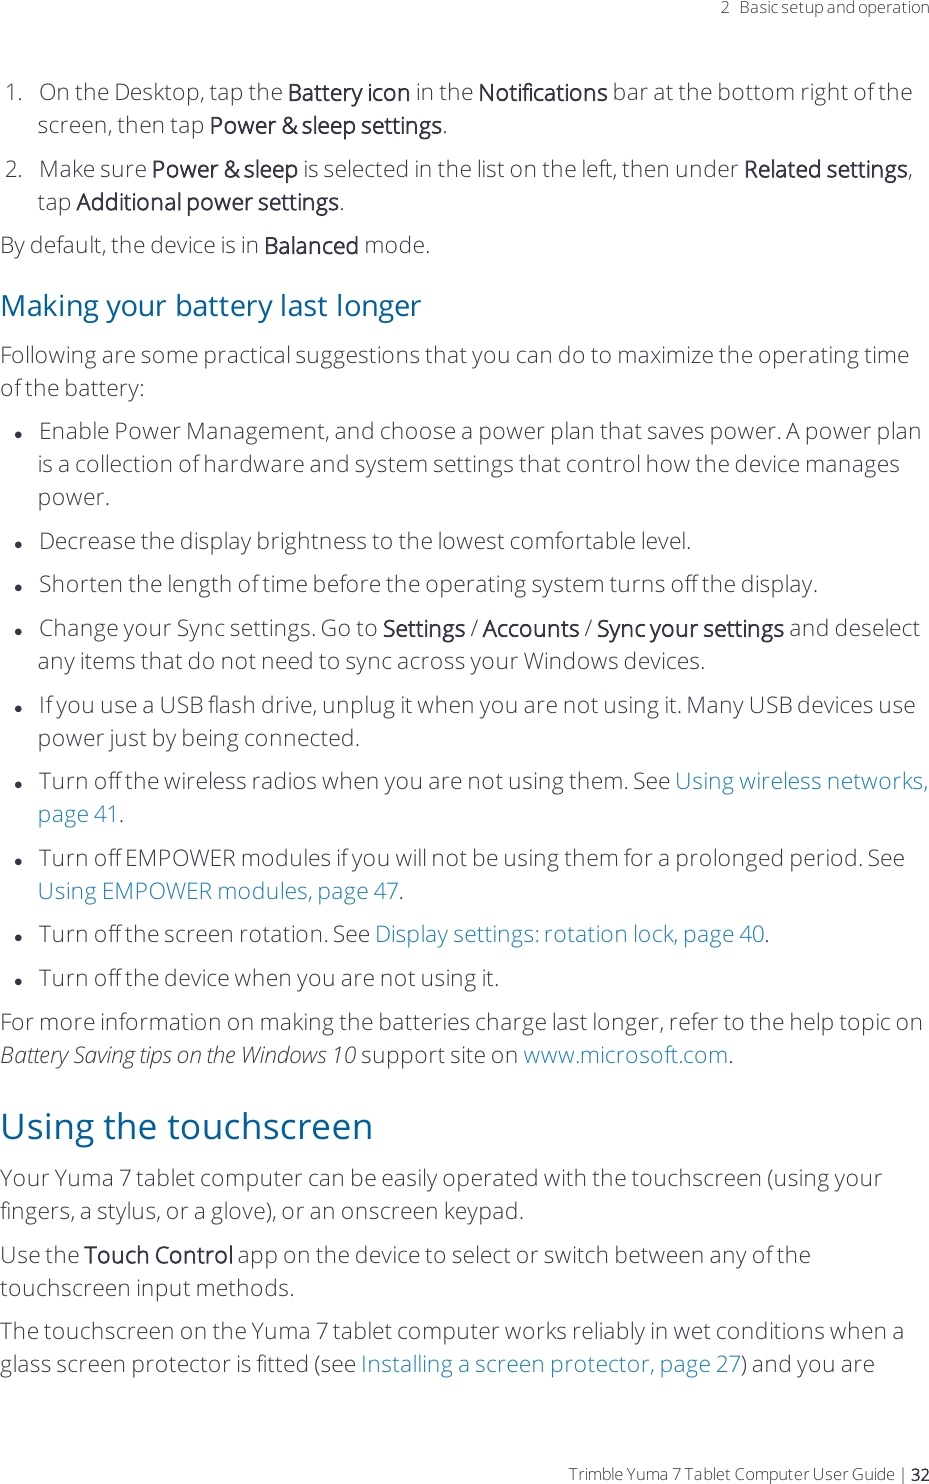 2 Basic setup and operation1.  On the Desktop, tap the Battery icon in the Notifications bar at the bottom right of the screen, then tap Power &amp; sleep settings.2.  Make sure Power &amp; sleep is selected in the list on the left, then under Related settings, tap Additional power settings.By default, the device is in Balanced mode.Making your battery last longerFollowing are some practical suggestions that you can do to maximize the operating time of the battery:lEnable Power Management, and choose a power plan that saves power. A power plan is a collection of hardware and system settings that control how the device manages power.lDecrease the display brightness to the lowest comfortable level.lShorten the length of time before the operating system turns off the display.lChange your Sync settings. Go to Settings / Accounts / Sync your settings and deselect any items that do not need to sync across your Windows devices.lIf you use a USB flash drive, unplug it when you are not using it. Many USB devices use power just by being connected. lTurn off the wireless radios when you are not using them. See Using wireless networks, page 41.lTurn off EMPOWER modules if you will not be using them for a prolonged period. See Using EMPOWER modules, page 47.lTurn off the screen rotation. See Display settings:rotation lock, page 40.lTurn off the device when you are not using it.For more information on making the batteries charge last longer, refer to the help topic on Battery Saving tips on the Windows 10 support site on www.microsoft.com.Using the touchscreenYour  Yuma 7 tablet computer can be easily operated with the touchscreen (using your fingers, a stylus, or a glove), or an onscreen keypad.Use the Touch Control app on the device to select or switch between any of the touchscreen input methods.The touchscreen on the  Yuma 7 tablet computer works reliably in wet conditions when a glass screen protector is fitted (see Installing a screen protector, page 27) and you are Trimble Yuma 7 Tablet Computer User Guide | 32